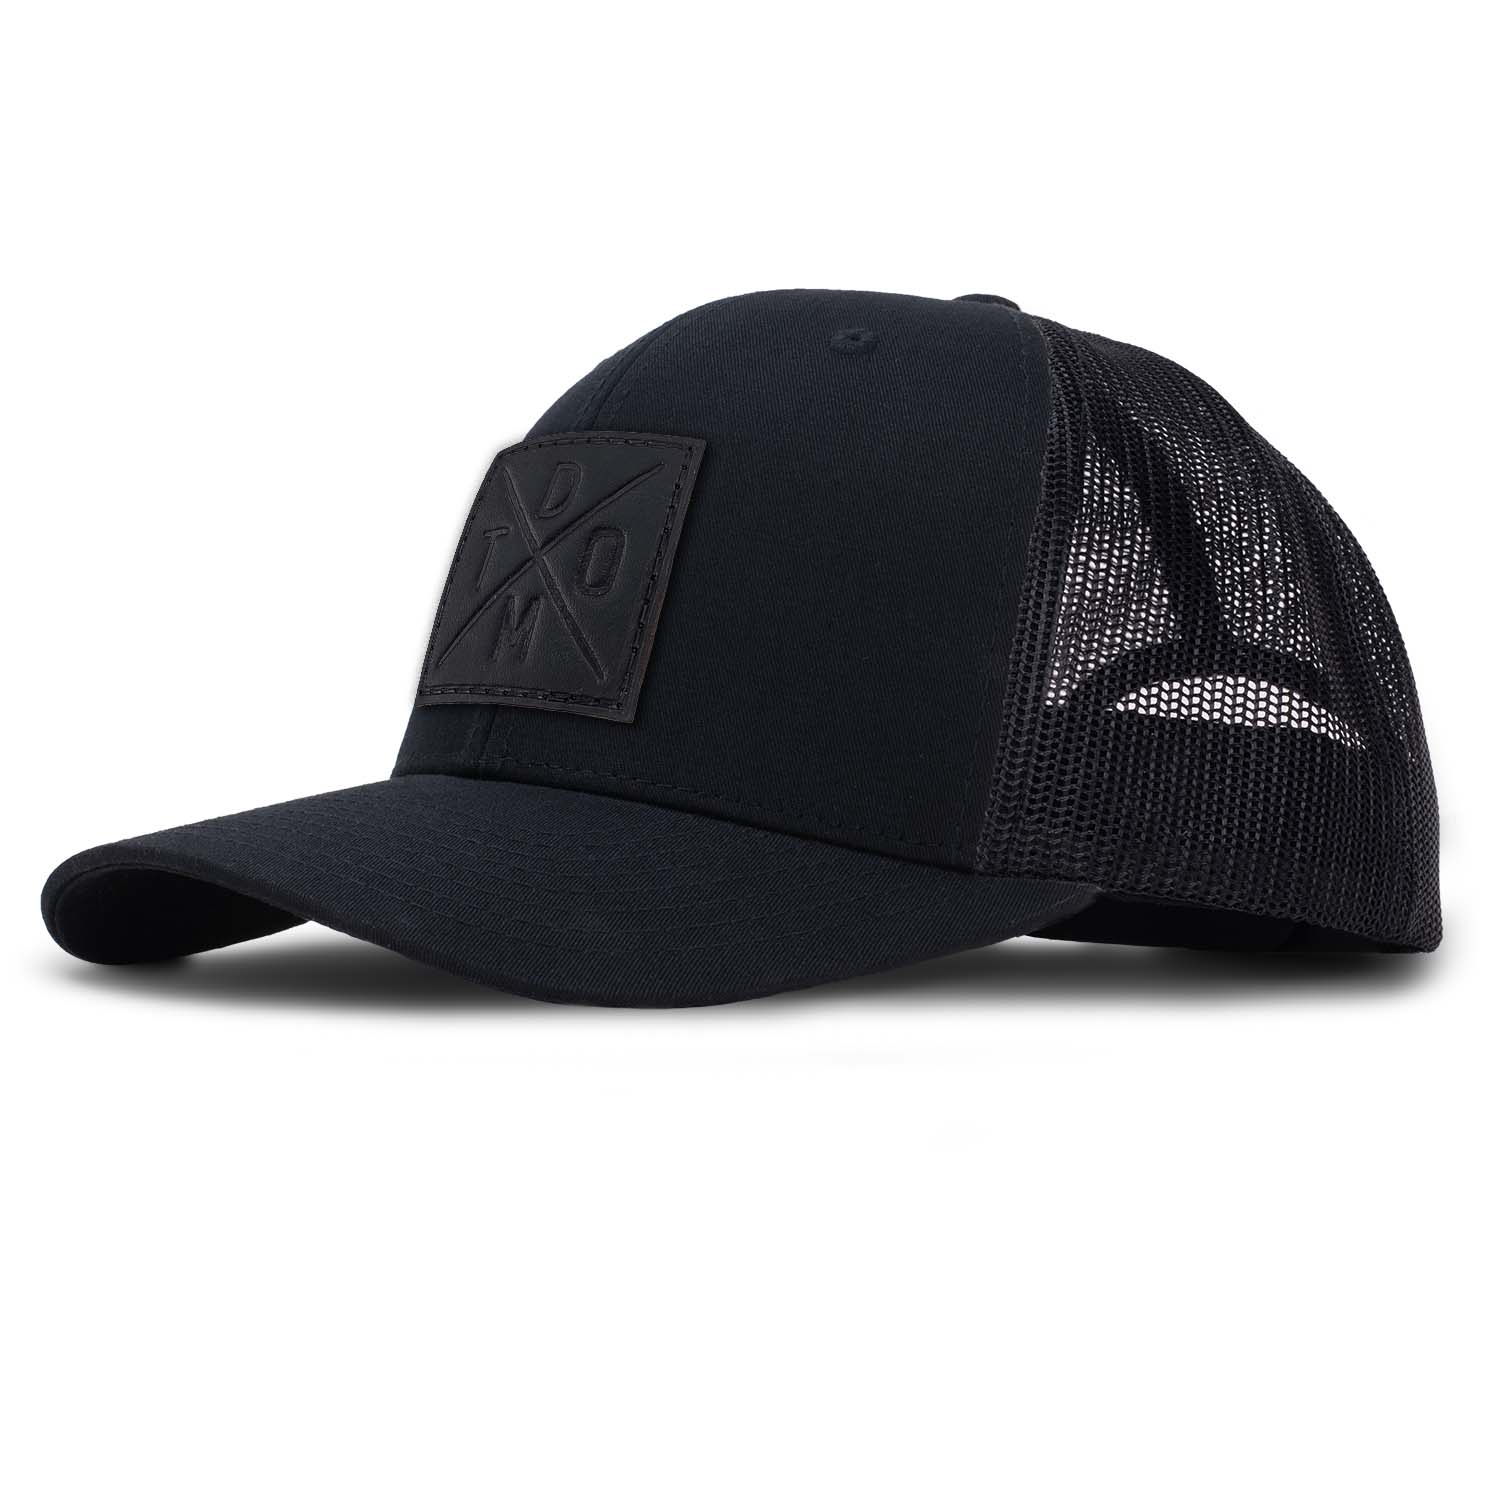 Blackout DTOM Leather patch on all black classic trucker hat